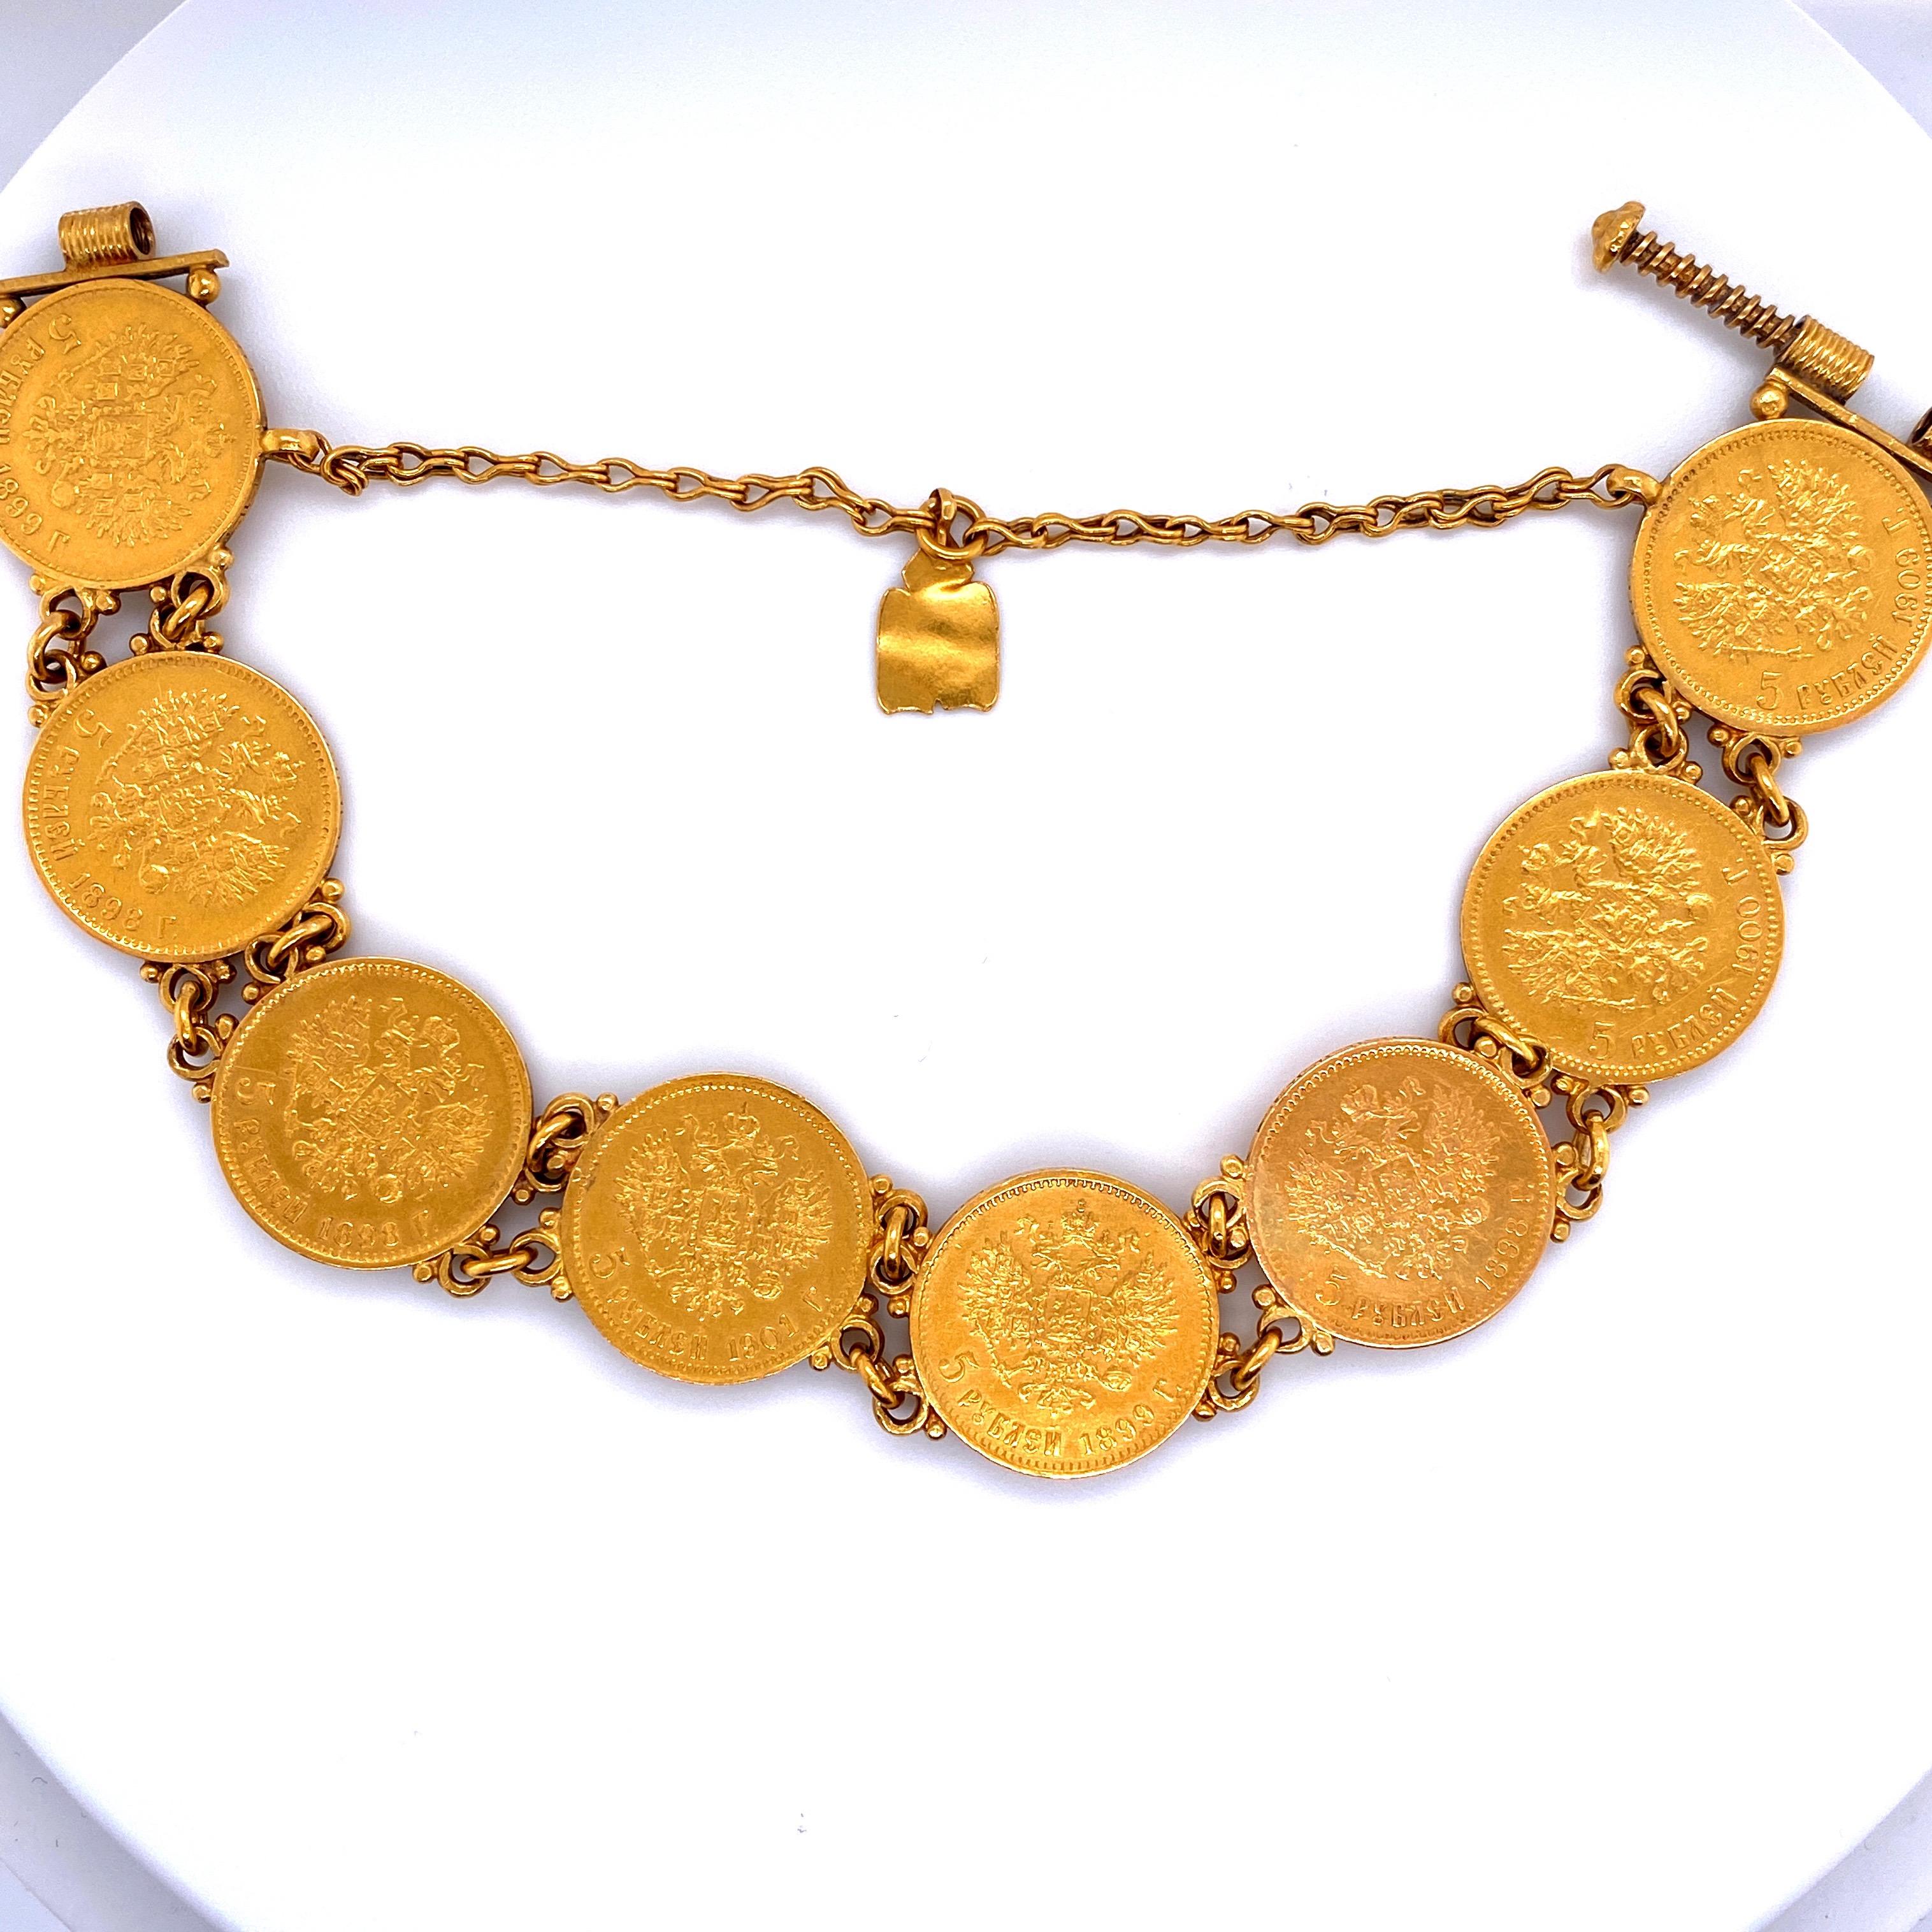 22K Yellow gold bracelet featuring 8 Russian Ruble coins dating back from 1898-1909, screwing bracket.

Additional coins available if needed to be longer.
Price does not reflect additional coins. 